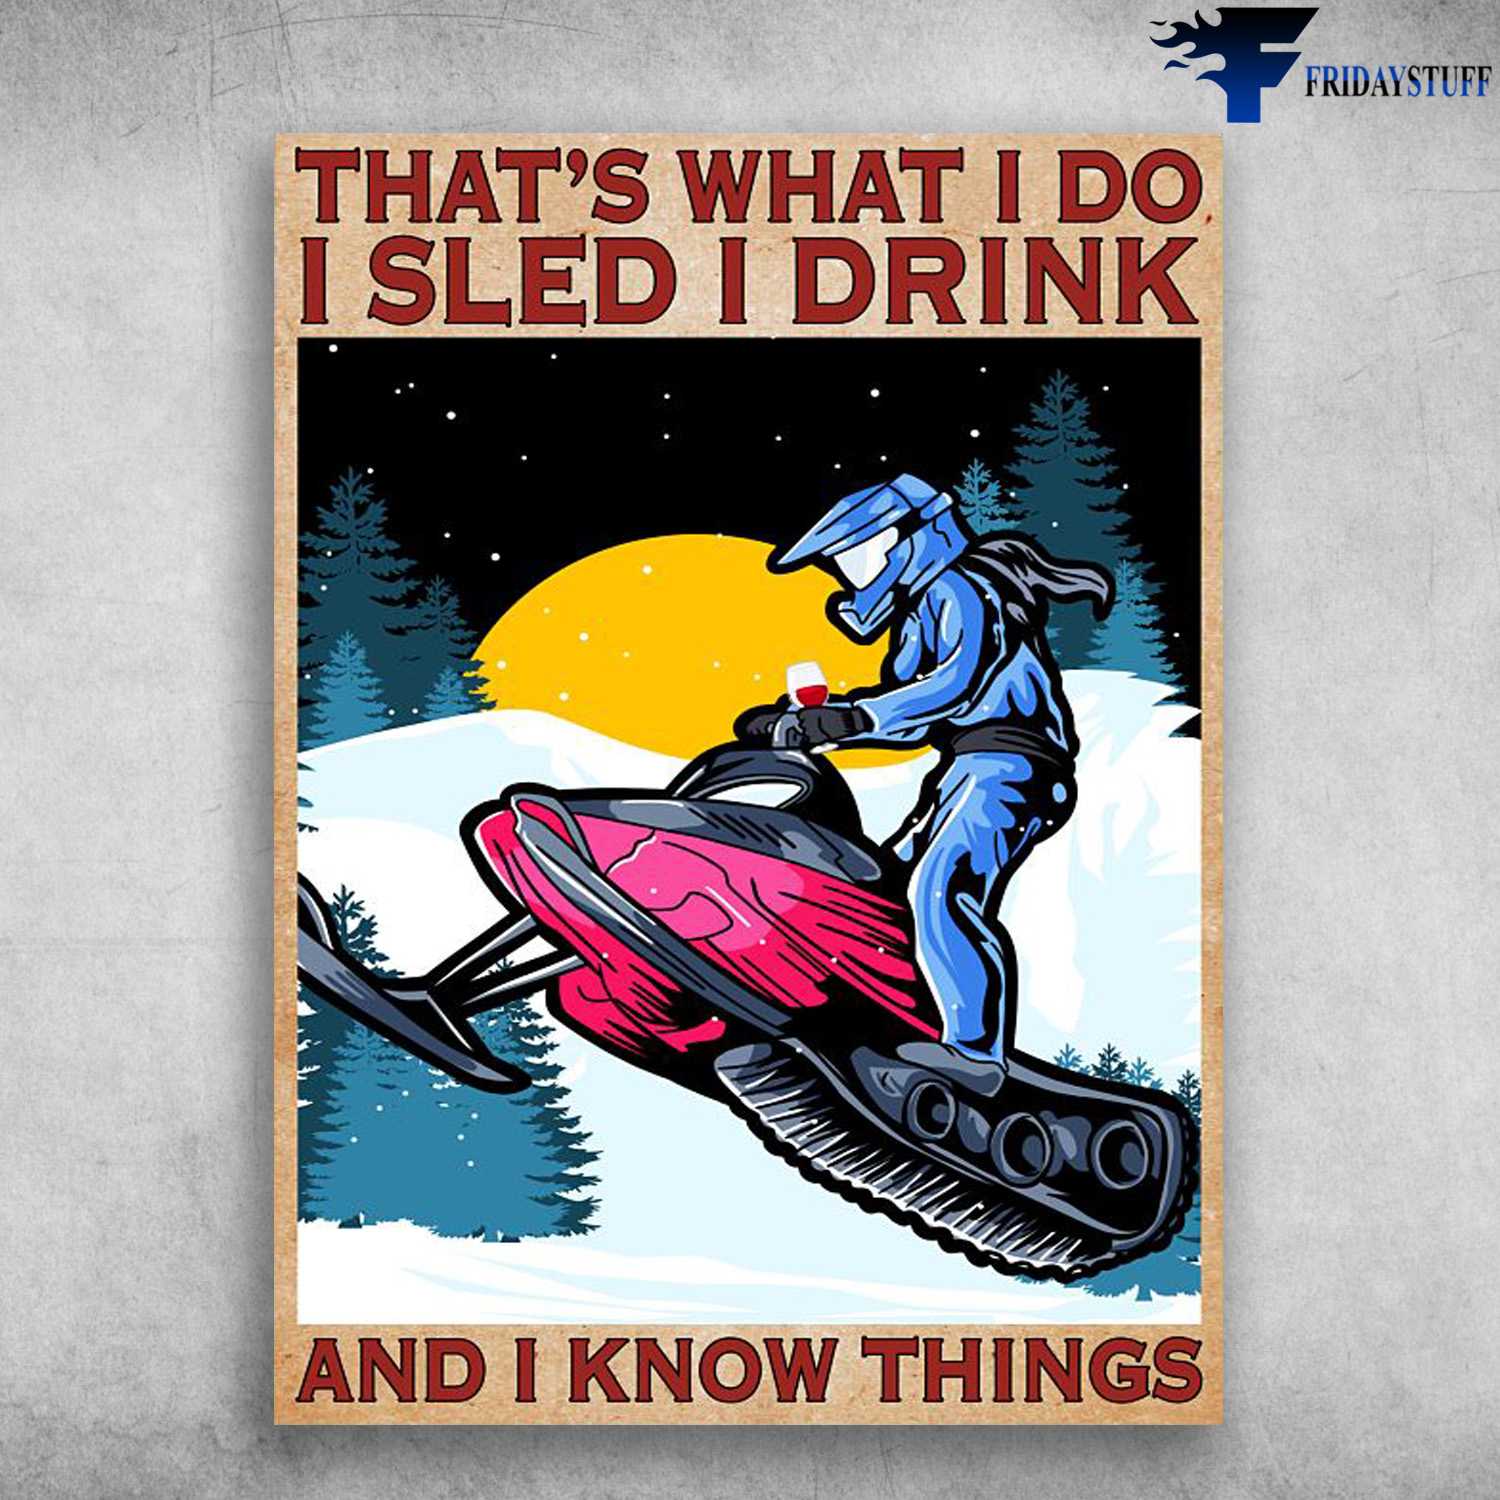 Sledding Man, Sledding With Wine, That's What I Do, I Sled, I Drink, And I Know Things